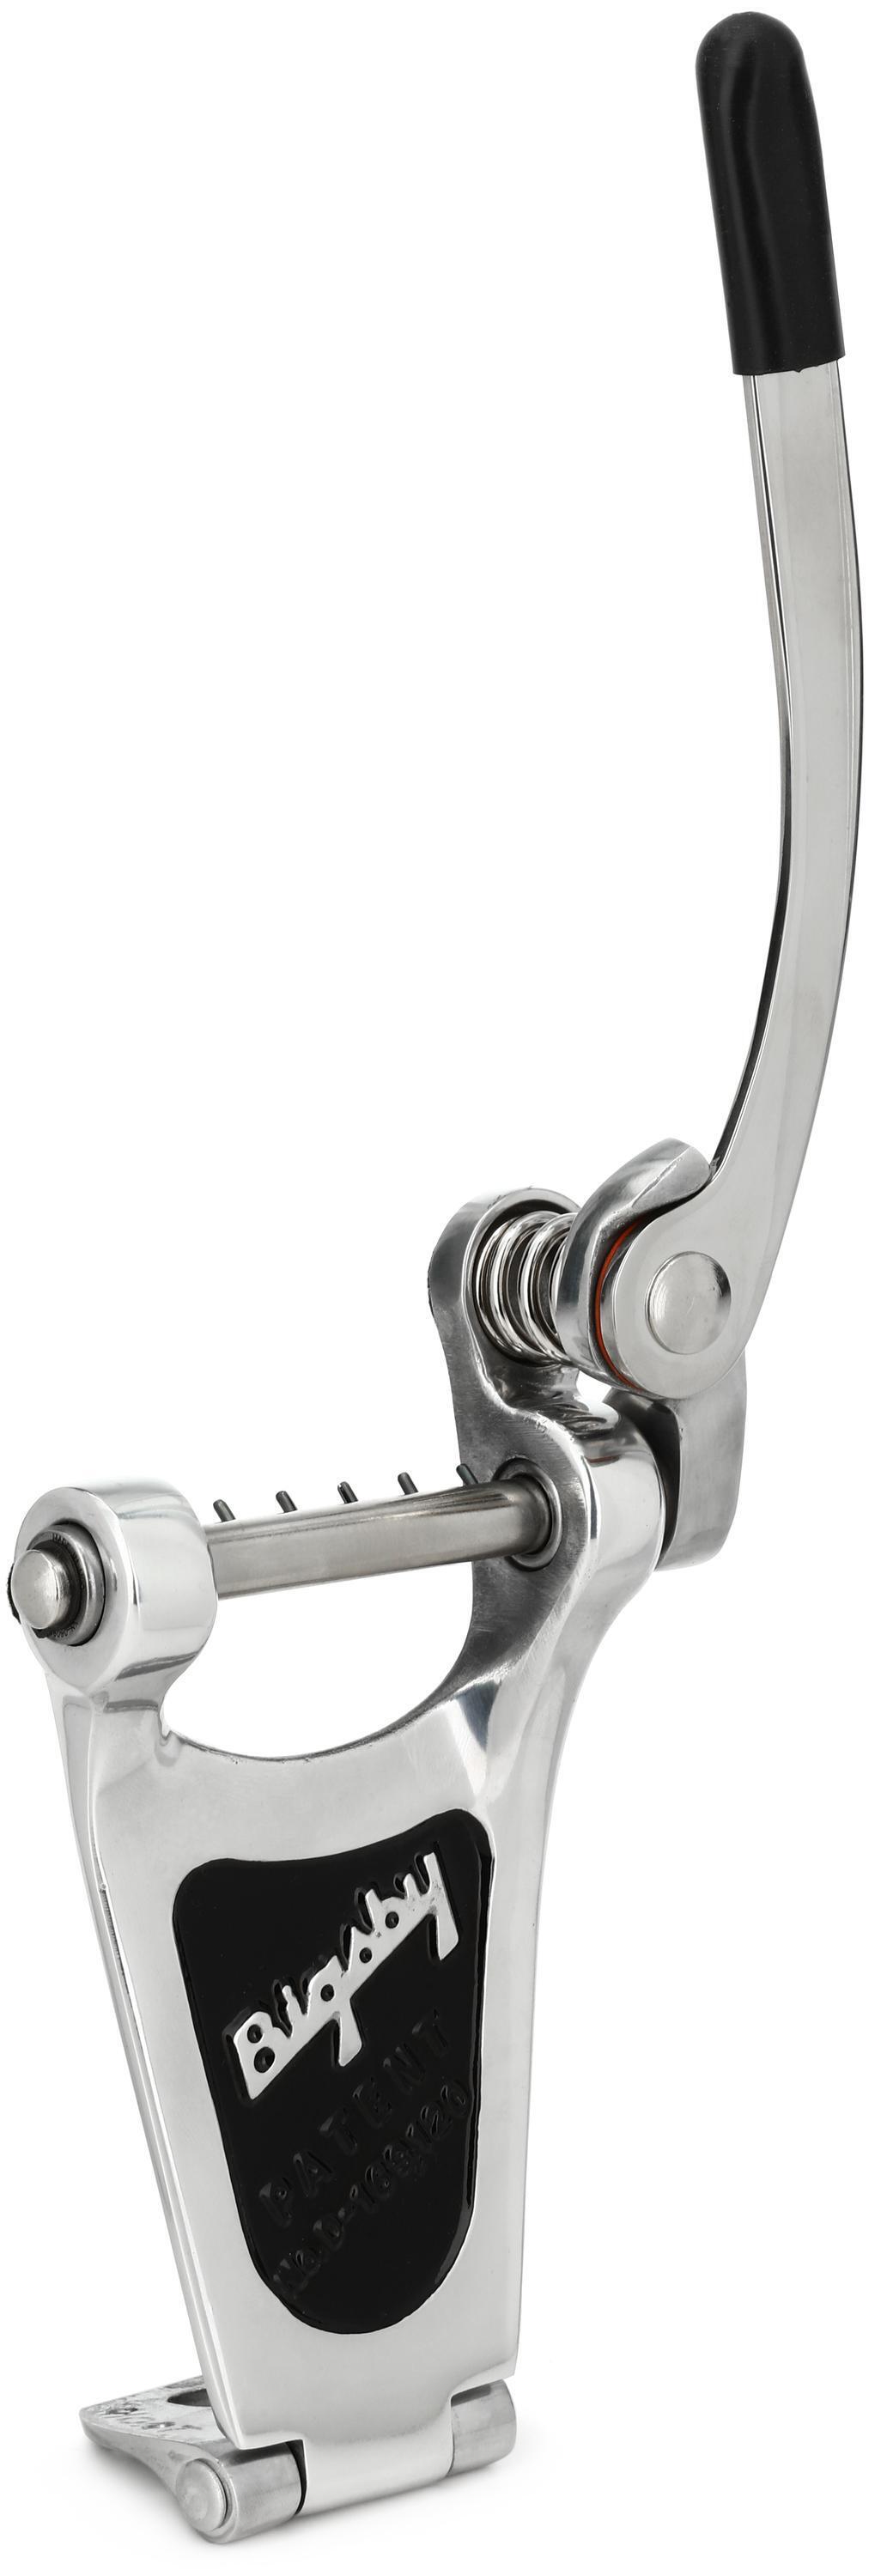 Bigsby Bigsby B3 Vibrato Tailpiece Assembly - Aluminum